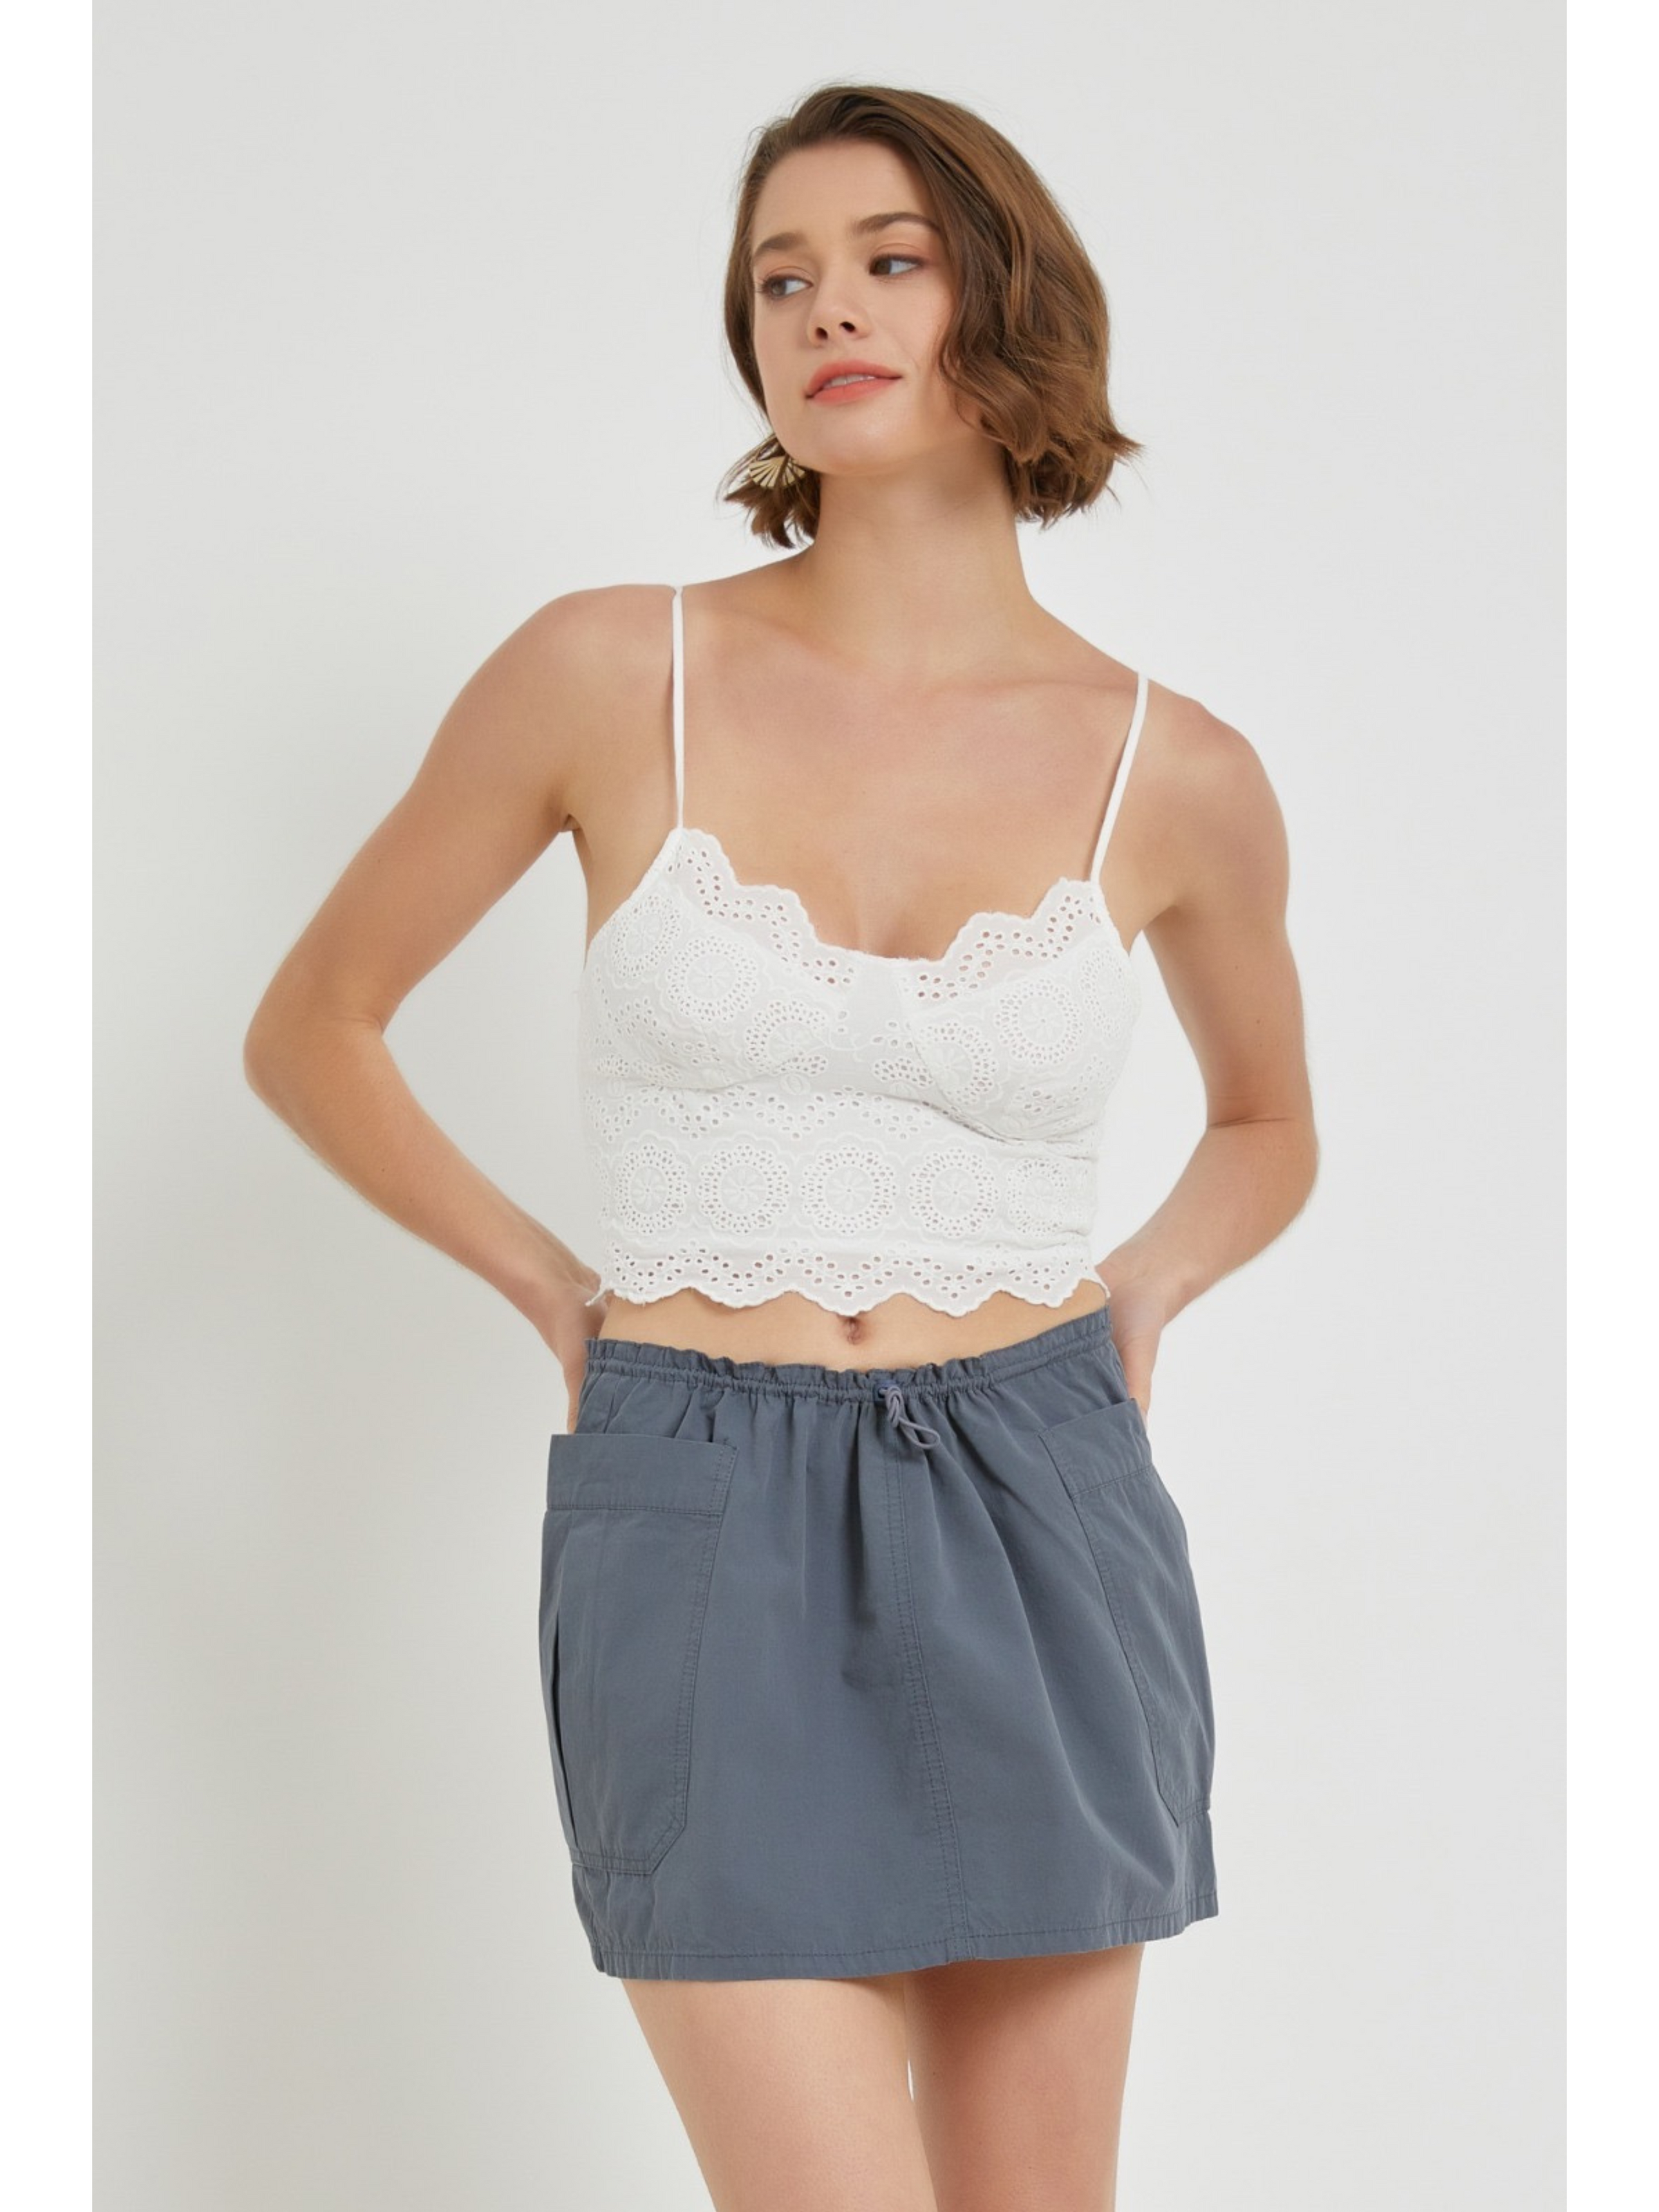 Eyelet Lace Bustier Top – Ruby and Jenna